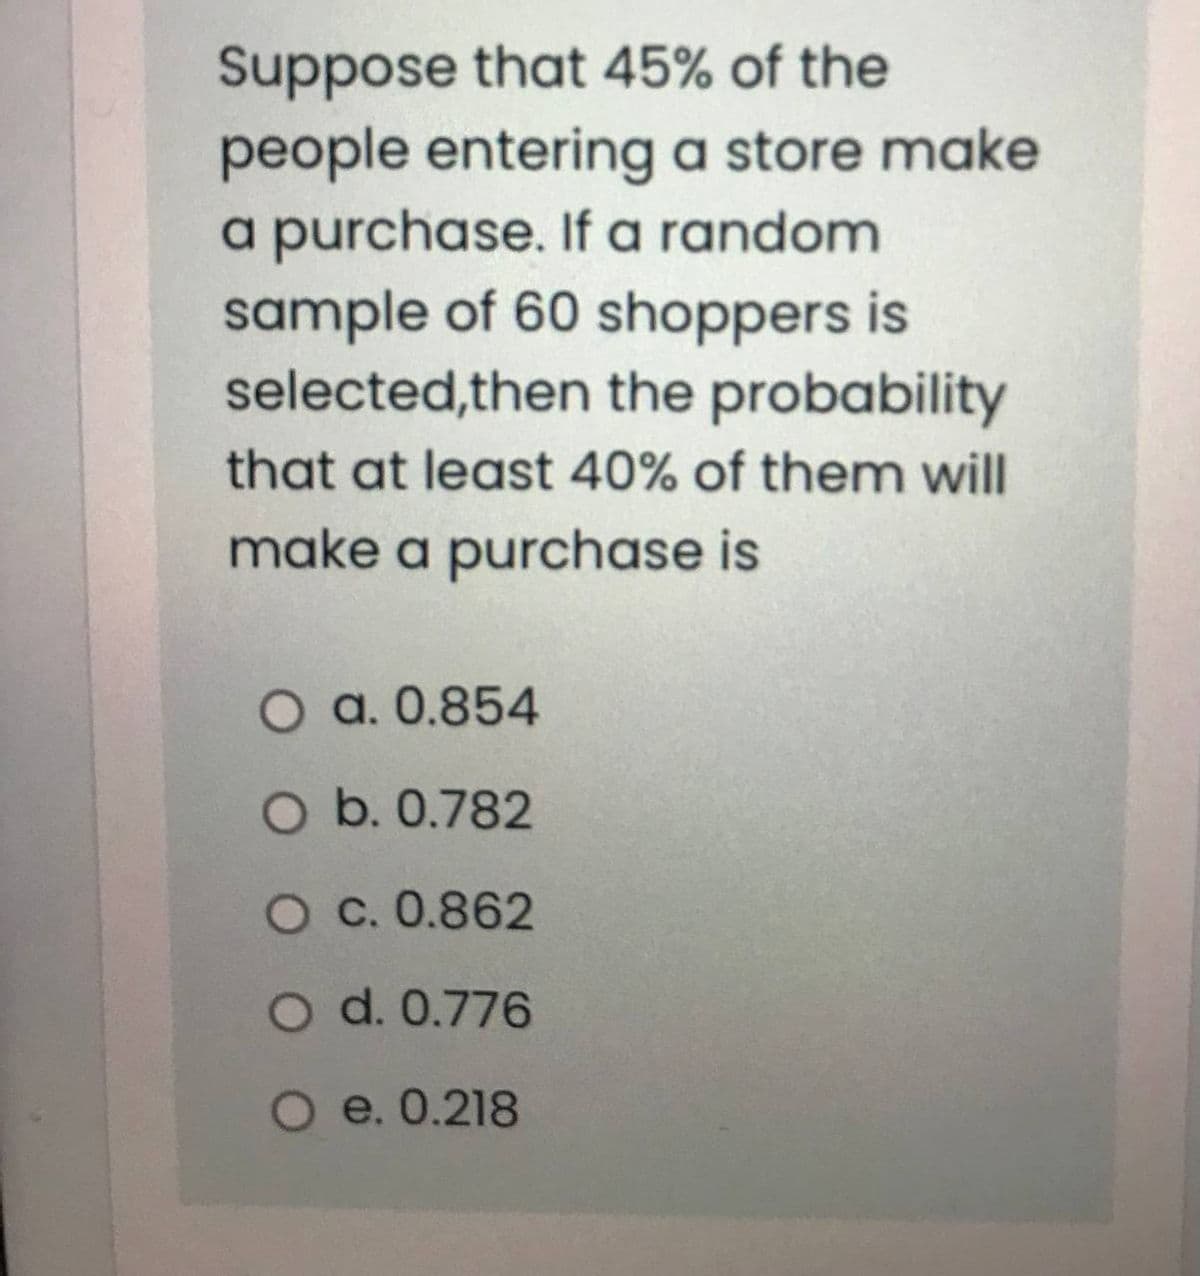 Suppose that 45% of the
people entering a store make
a purchase. If a random
sample of 60 shoppers is
selected,then the probability
that at least 40% of them will
make a purchase is
O a. 0.854
O b. 0.782
O C. 0.862
O d. 0.776
O e. 0.218
